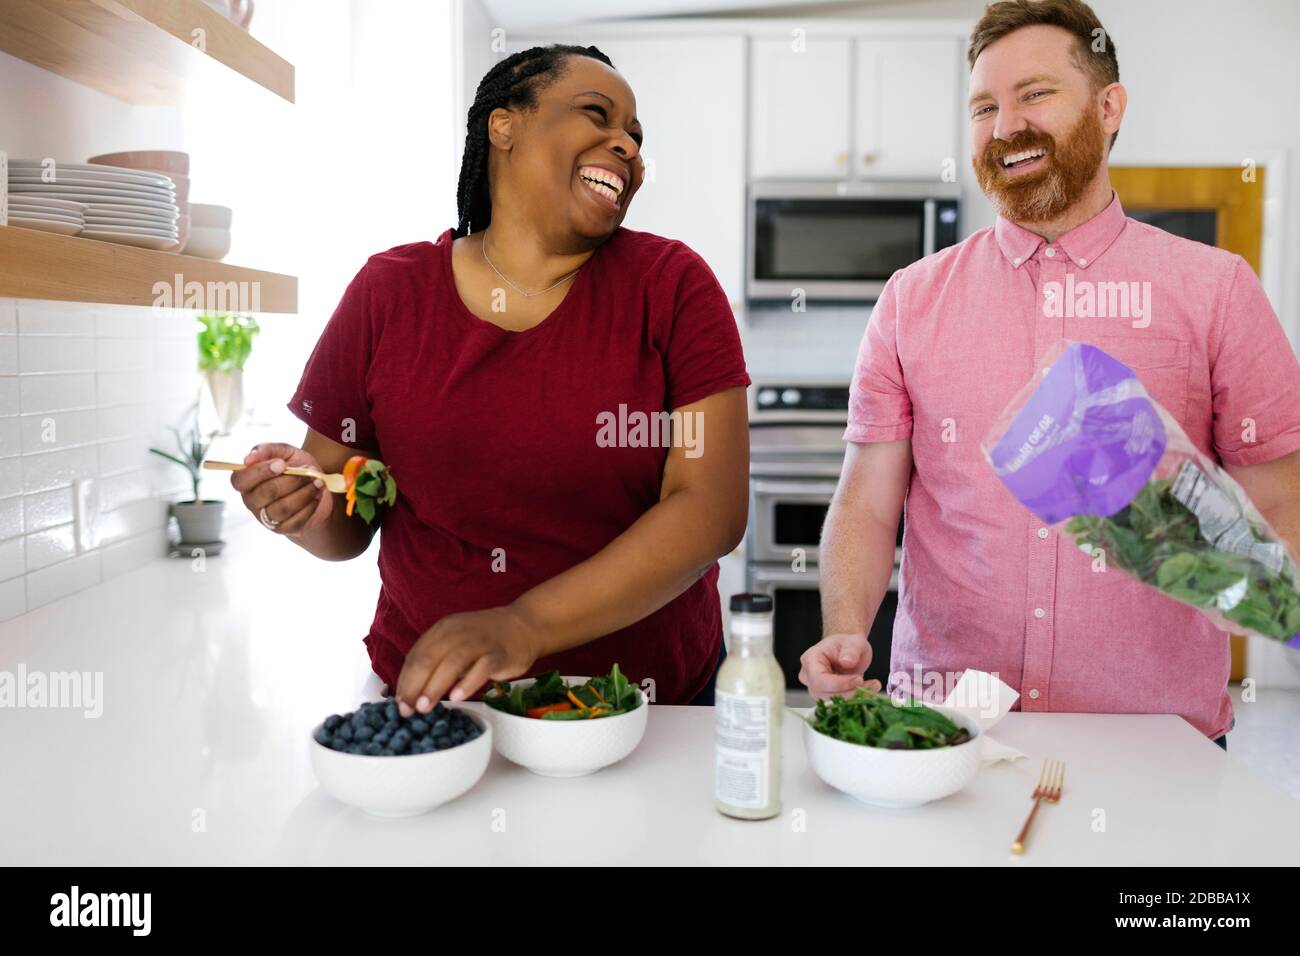 Happy man and woman preparing salad in kitchen Stock Photo